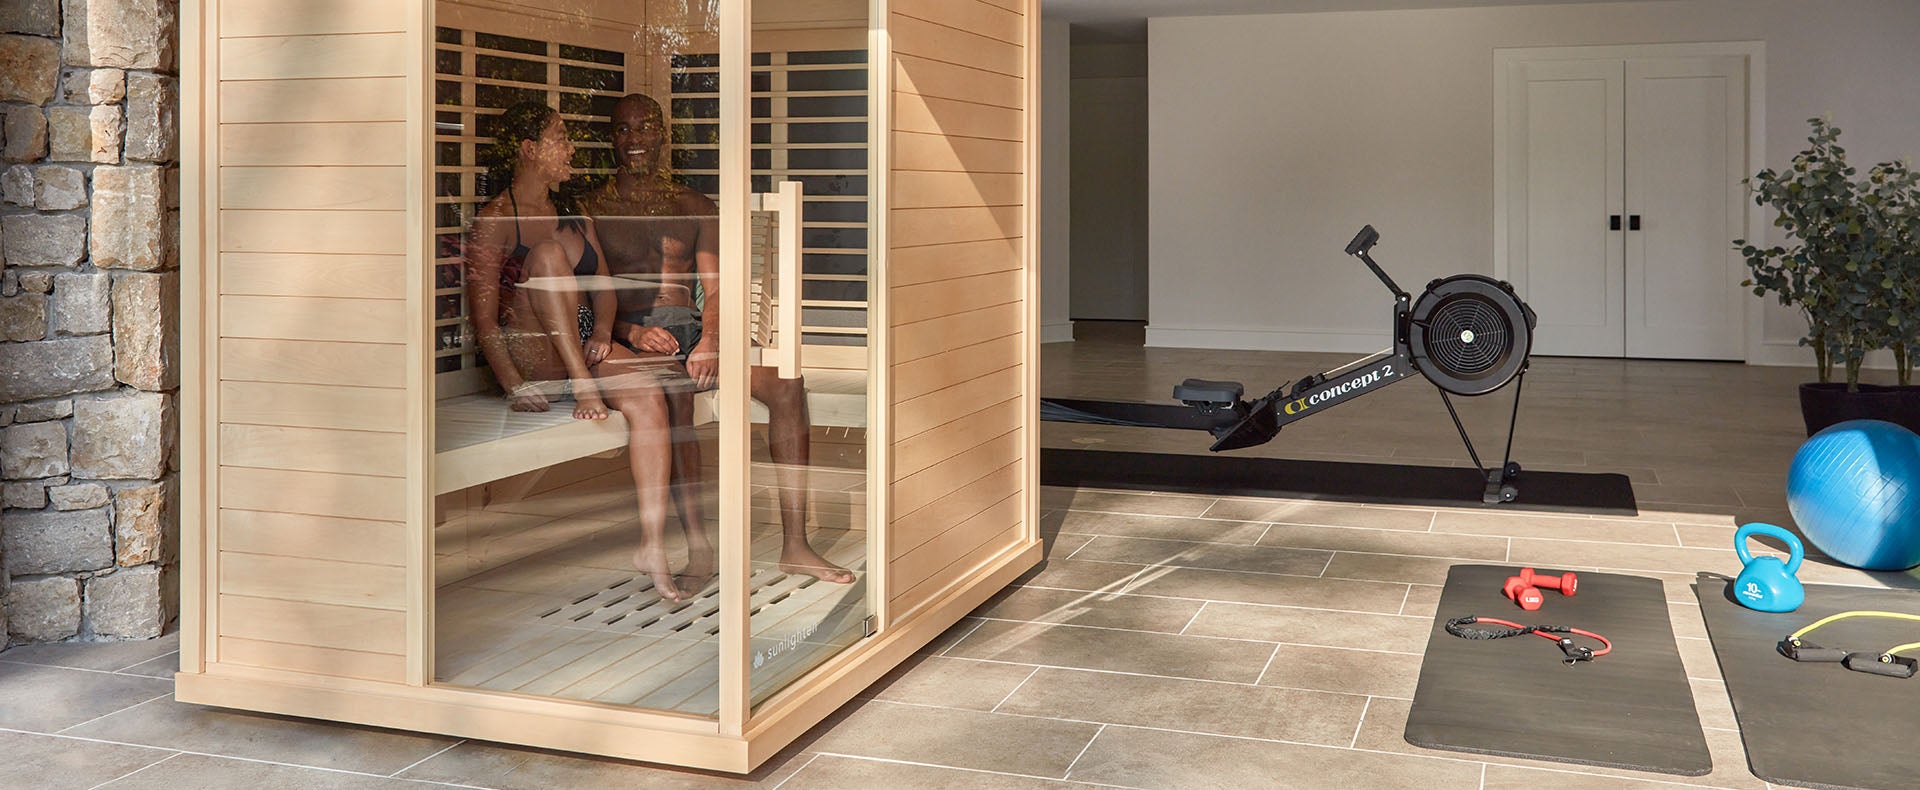 A couple relax in a Sunlighten mPulse Discover infrared sauna in their home gym.